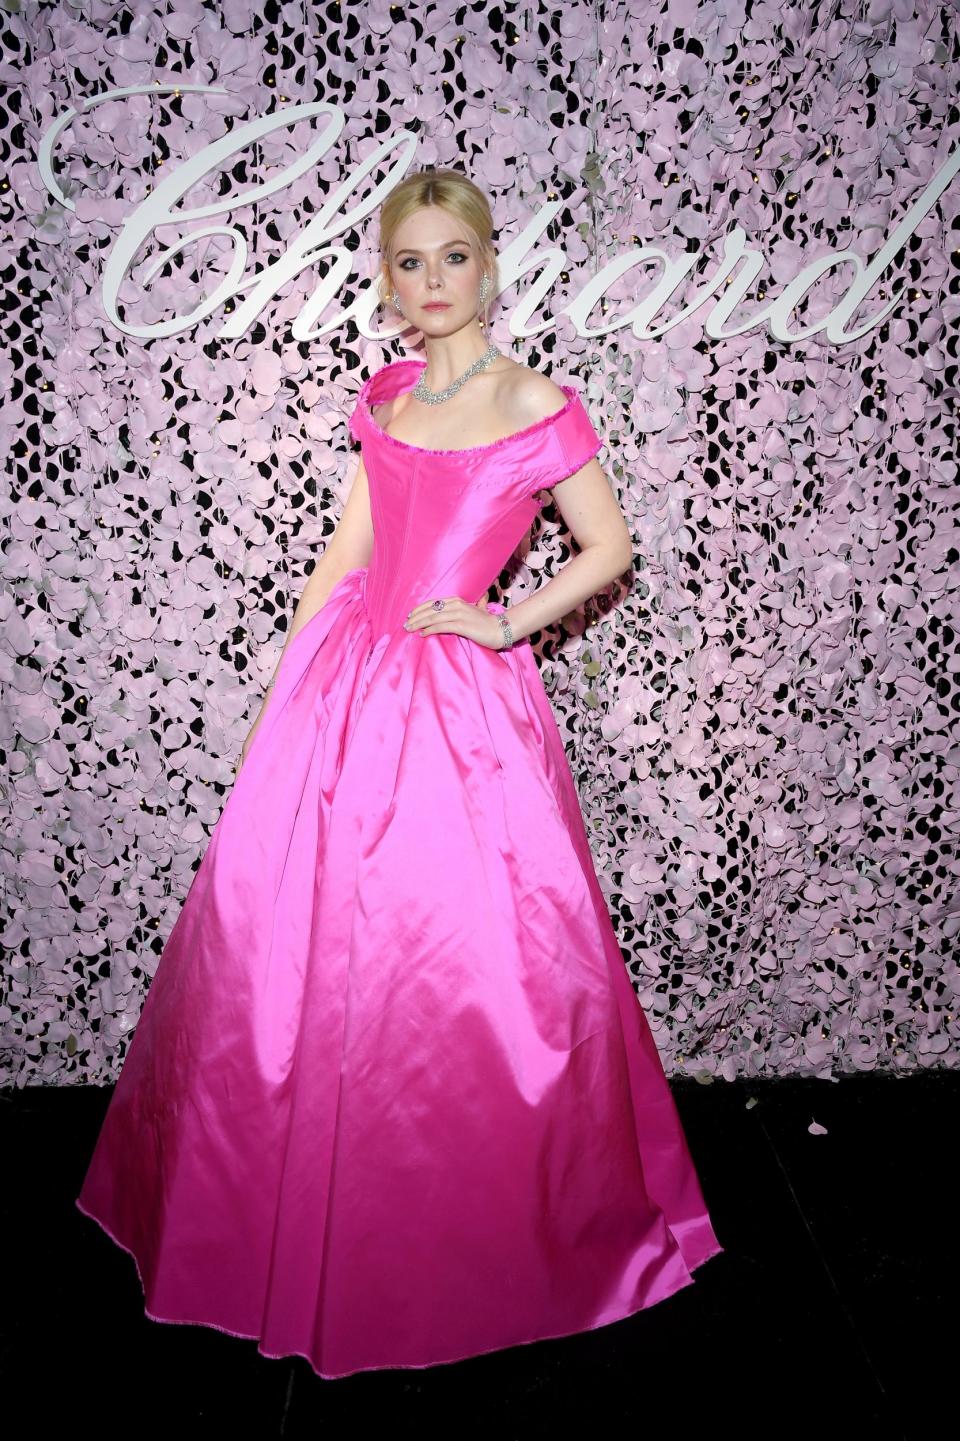 Elle Fanning at Cannes: See her best Grace Kelly and Barbie-inspired looks